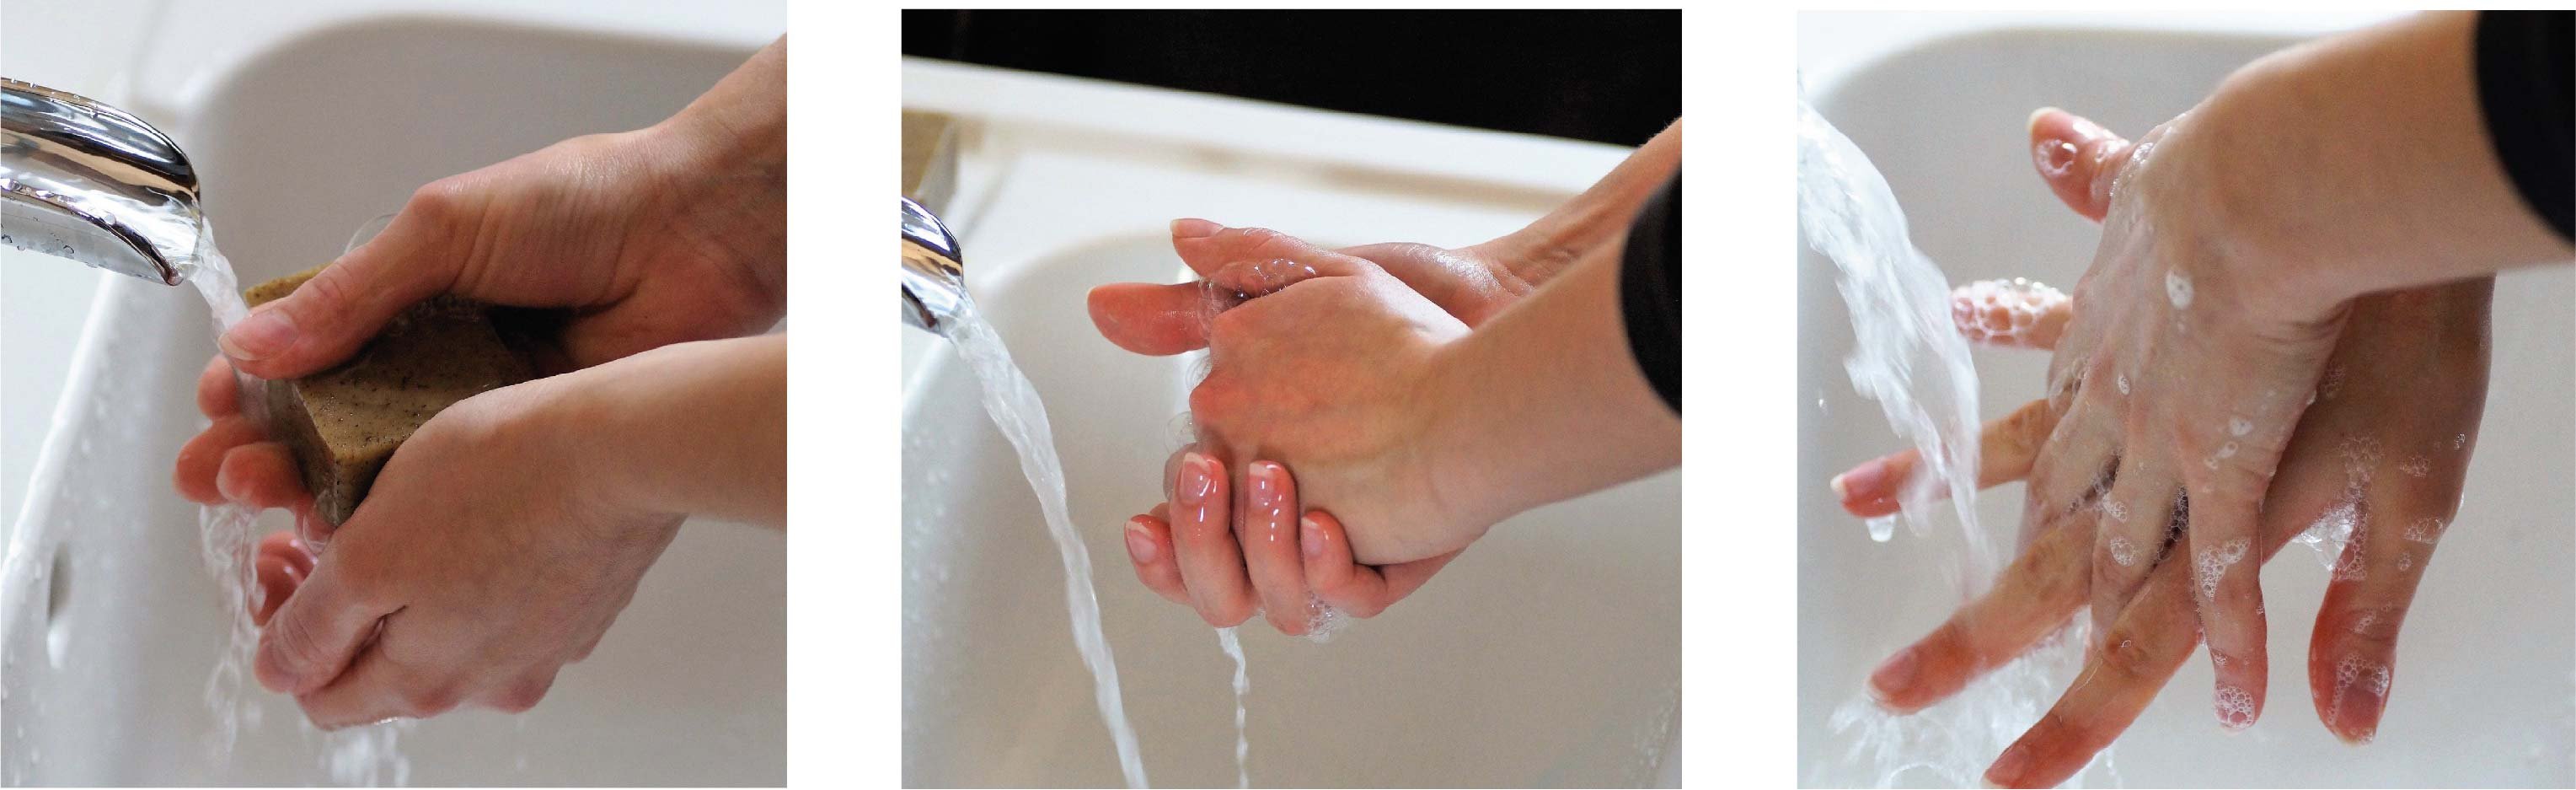 7 Steps of Handwashing: How to Wash Your Hands Properly